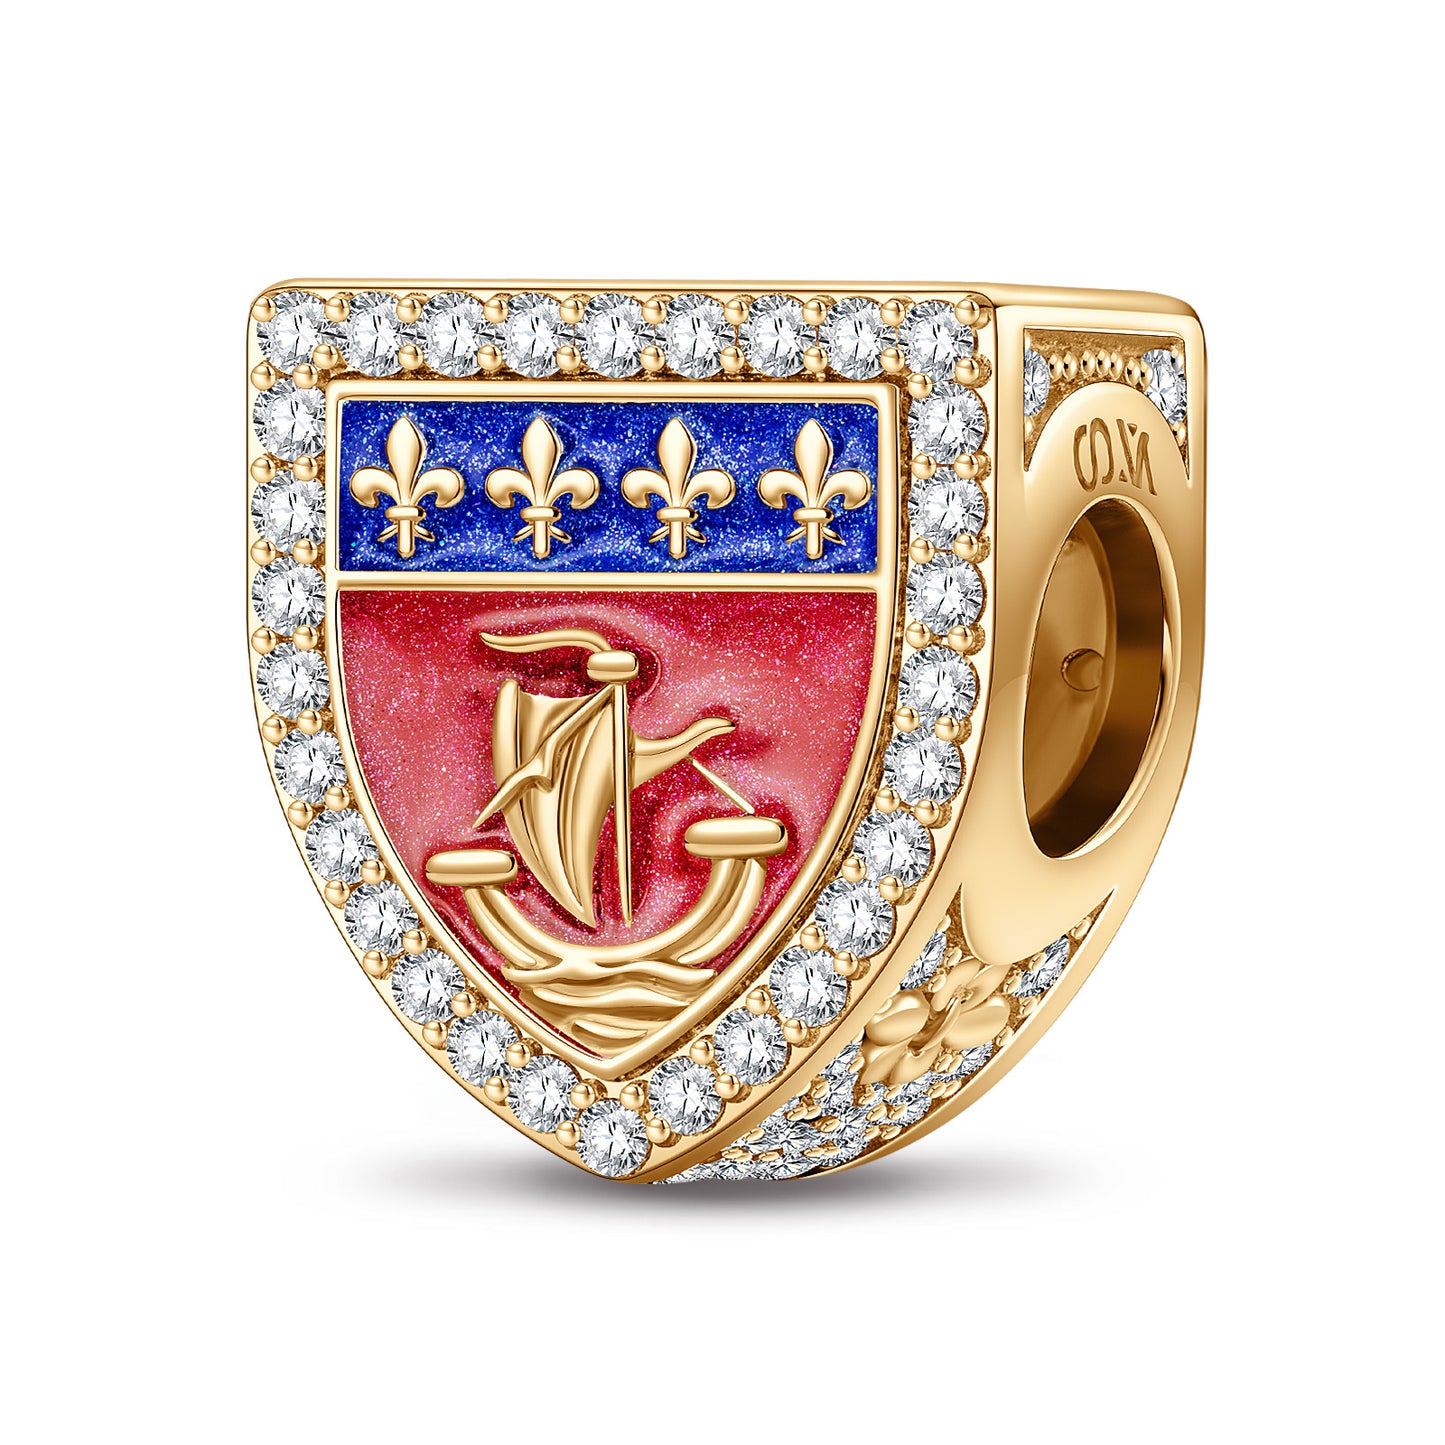 Gendarmerie Tarnish-resistant Silver Charms With Enamel In 14K Gold Plated